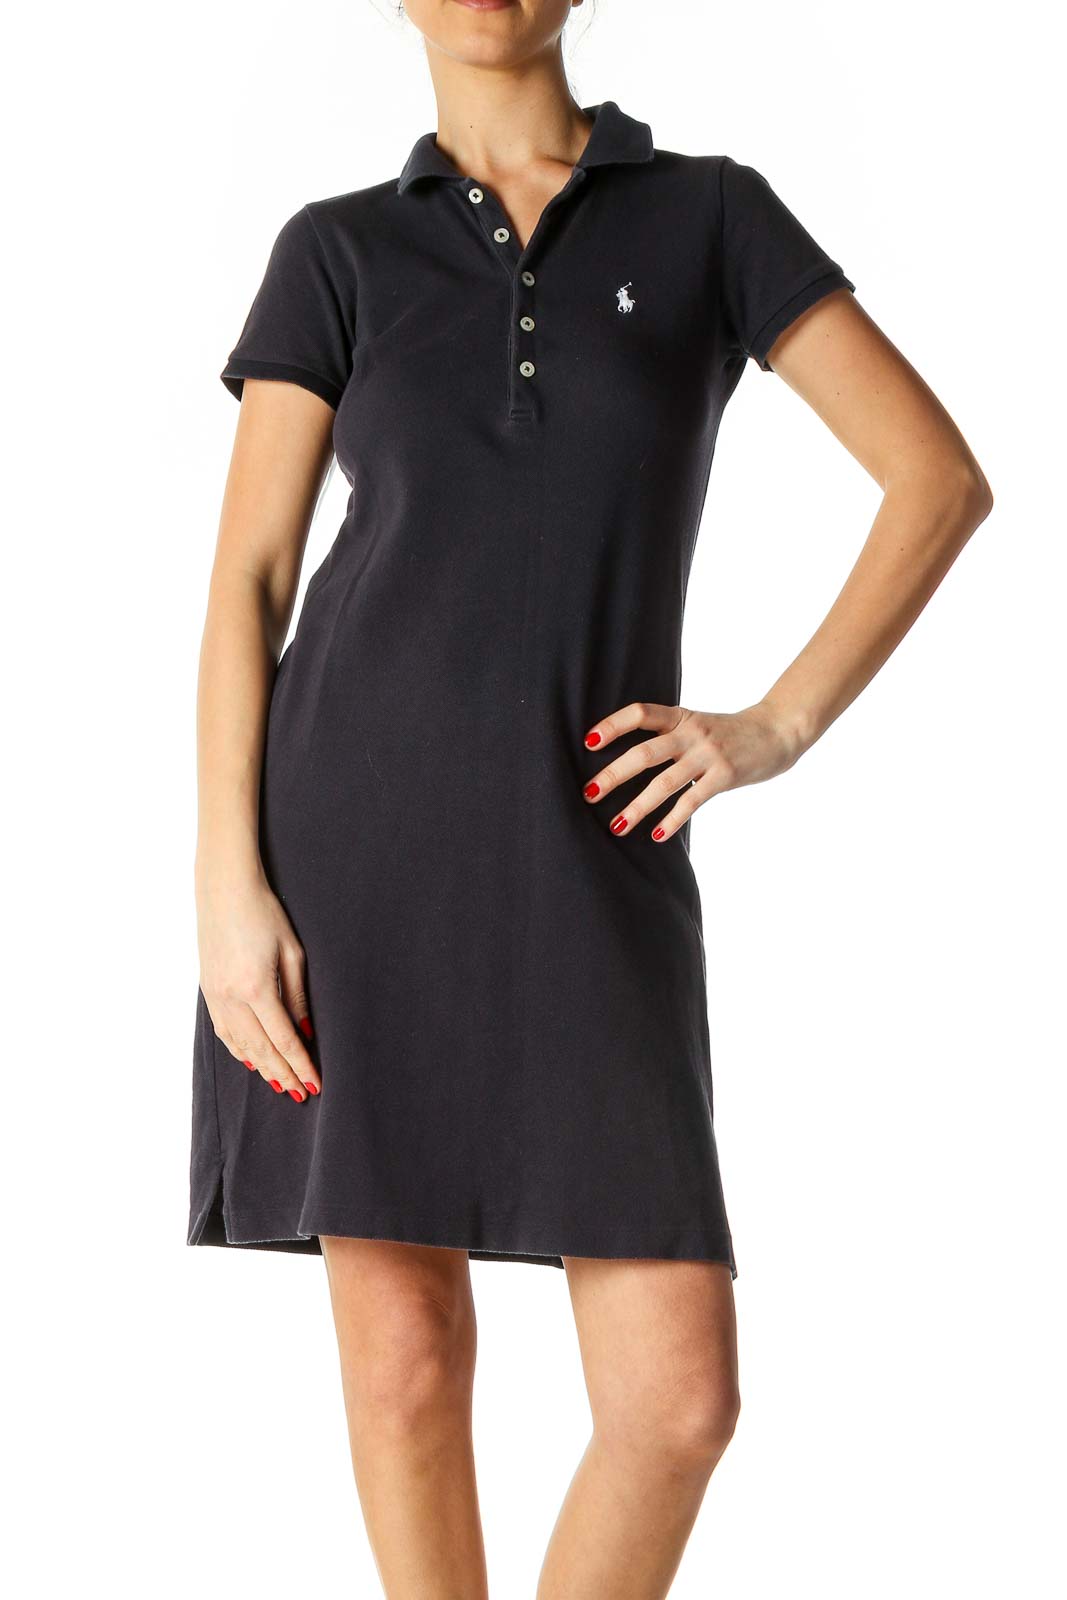 Black Solid Casual Polo Dress Front